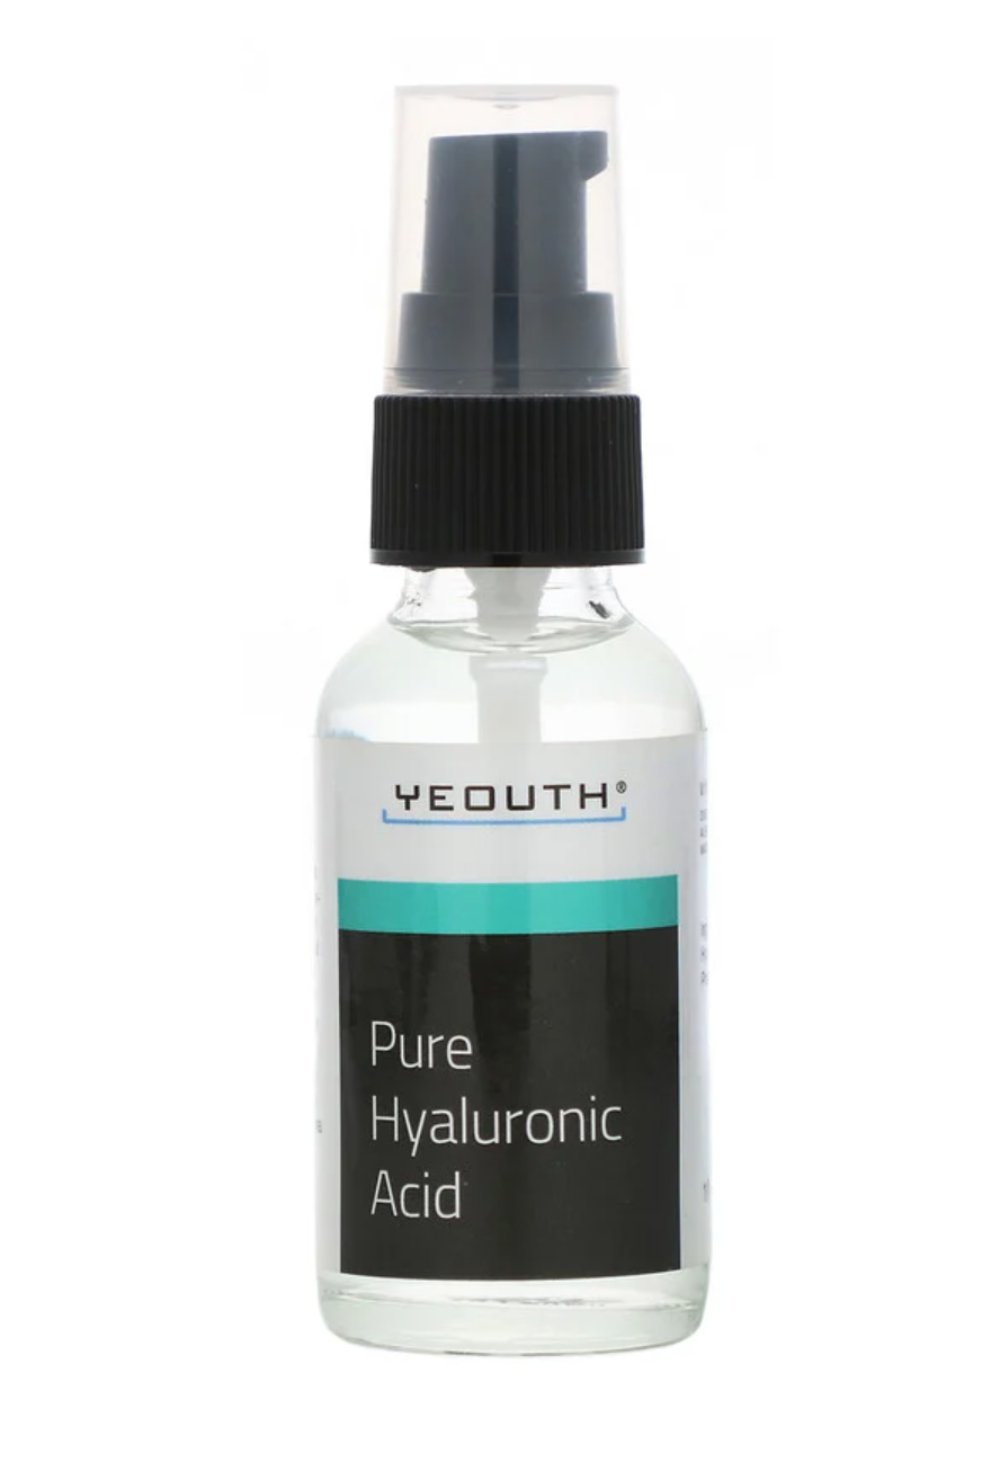 YEOUTH Pure Hyaluronic Acid 30 ml (1 fl oz) - The Face Method